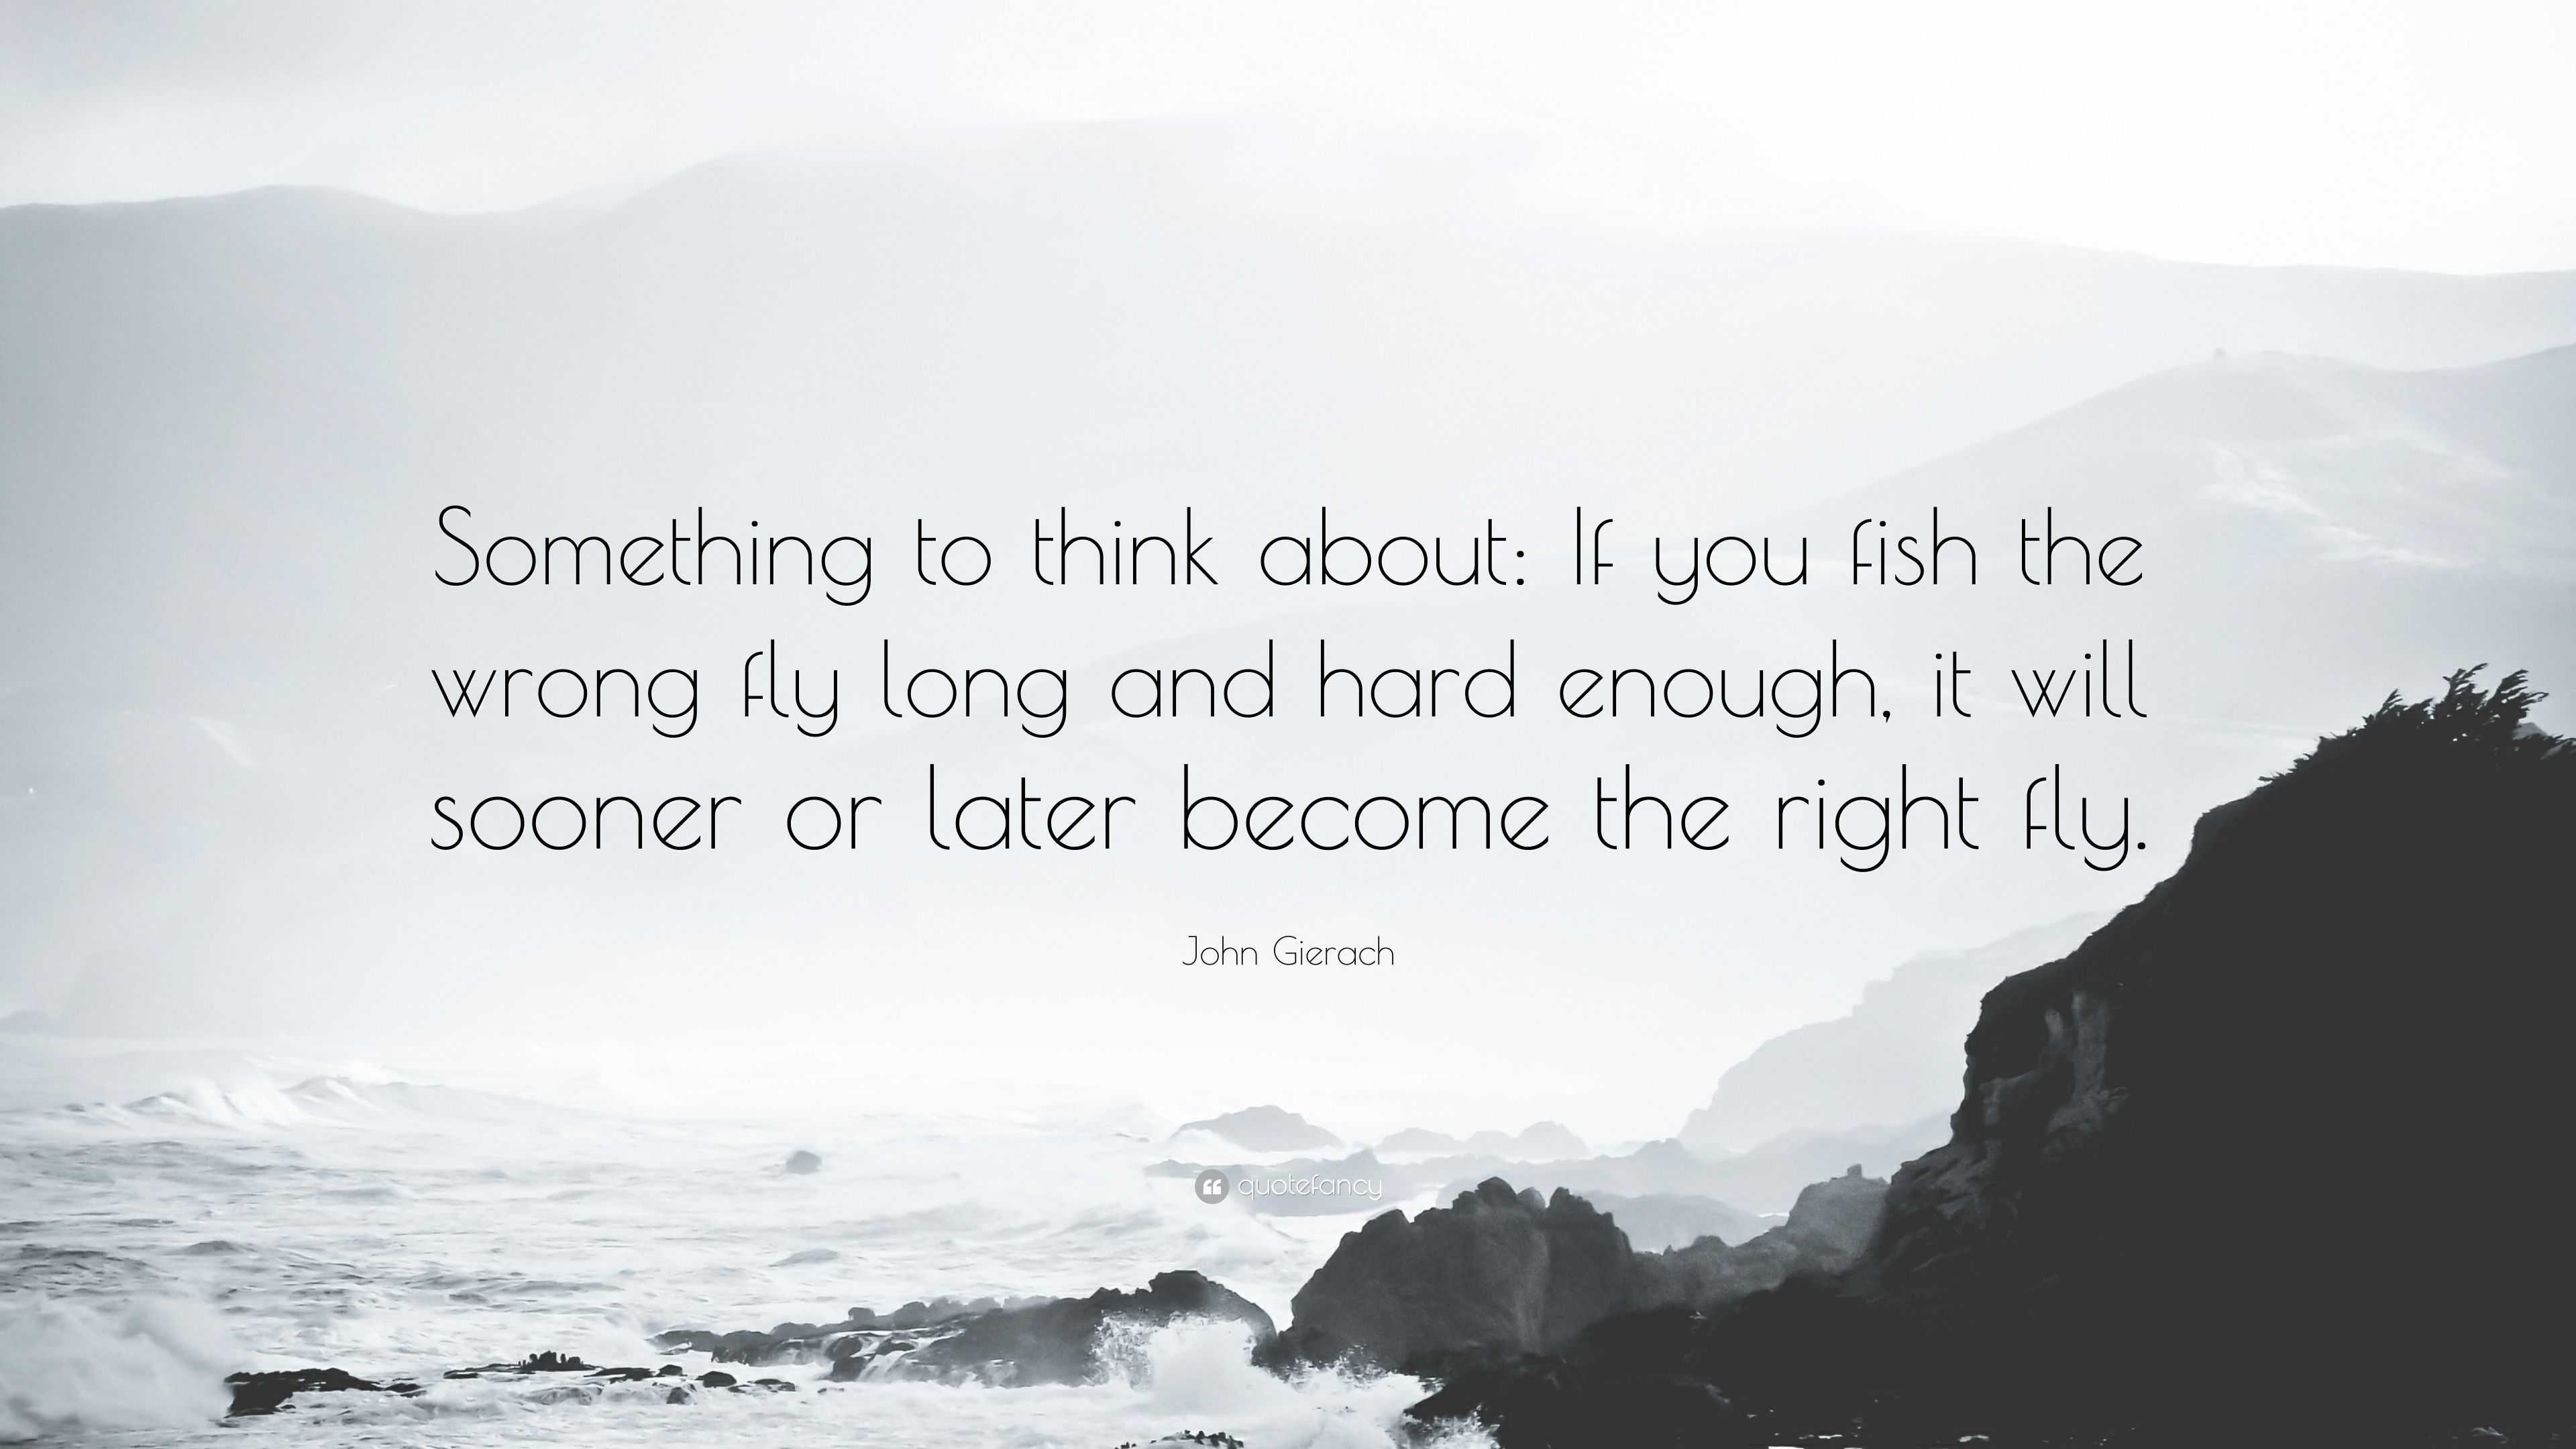 John Gierach Quote: “Something to think about: If you fish the